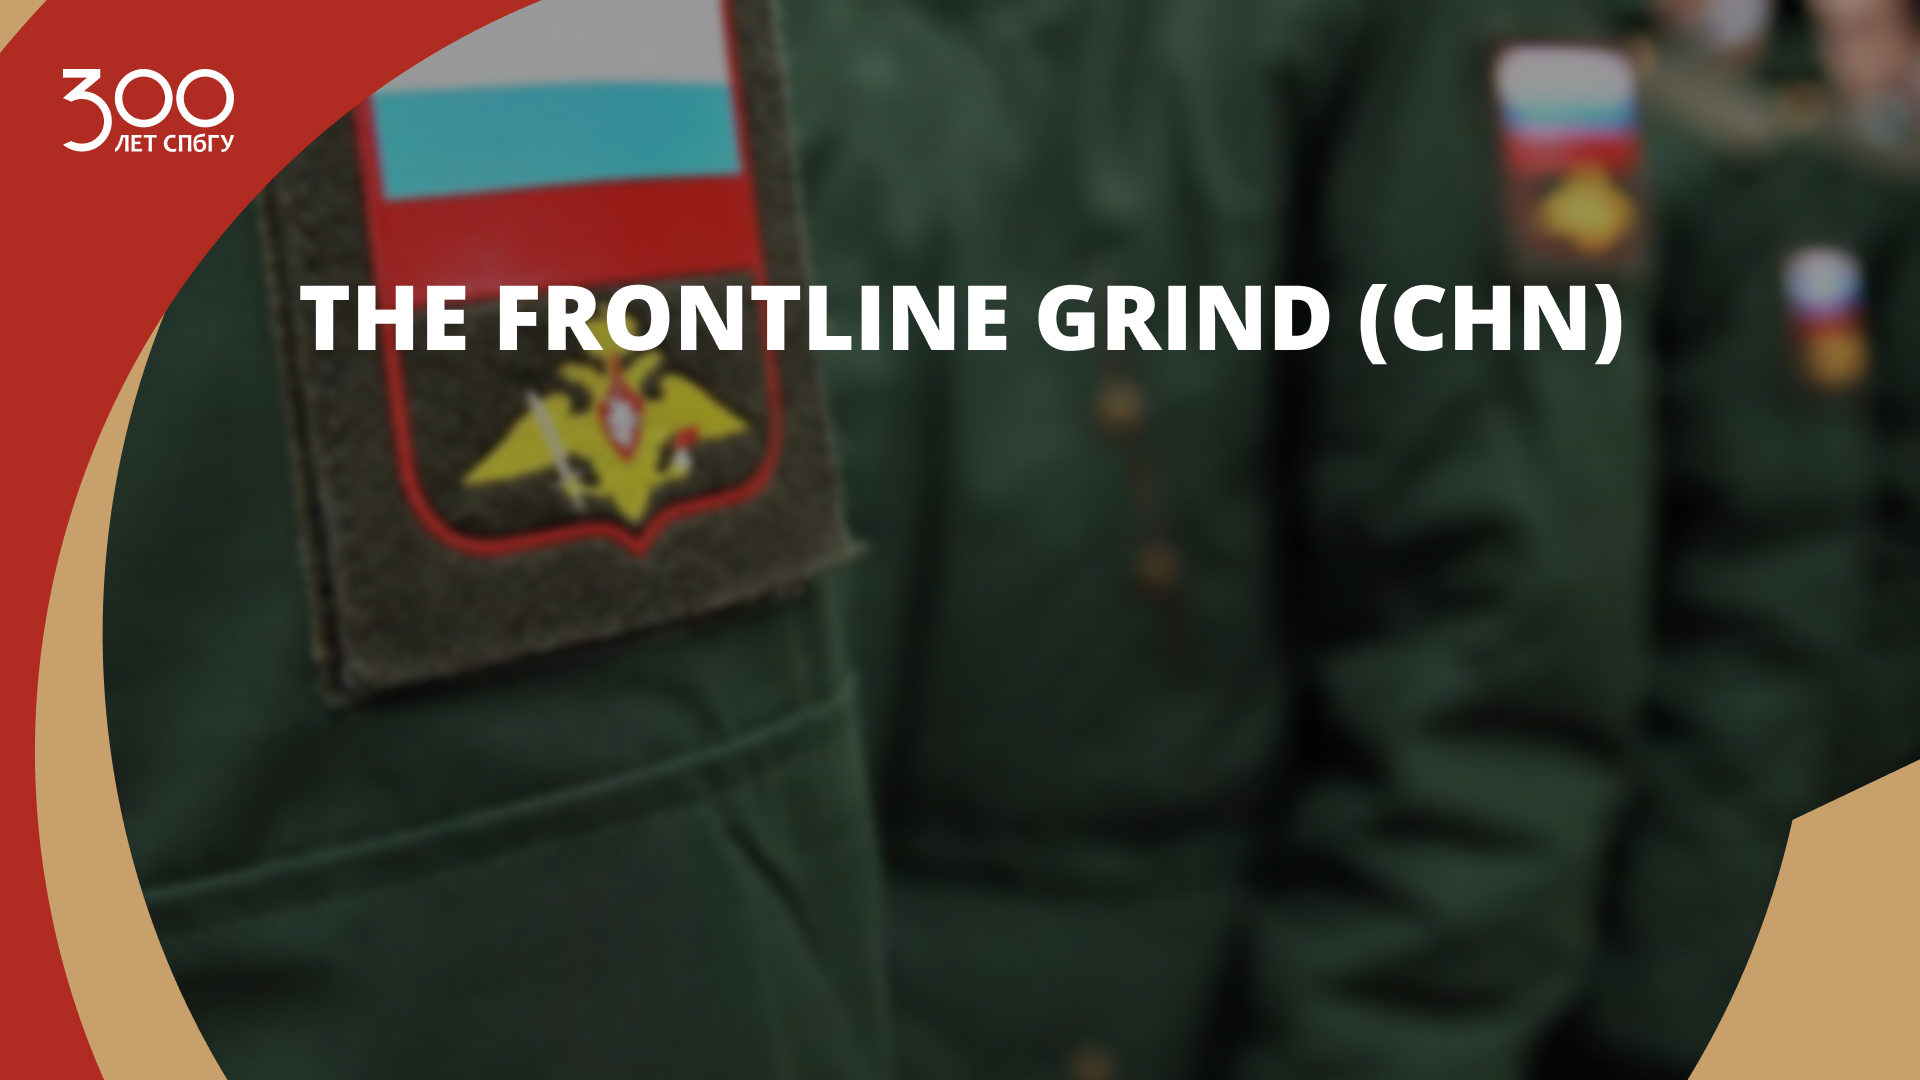 The Frontline Grind (CHN)